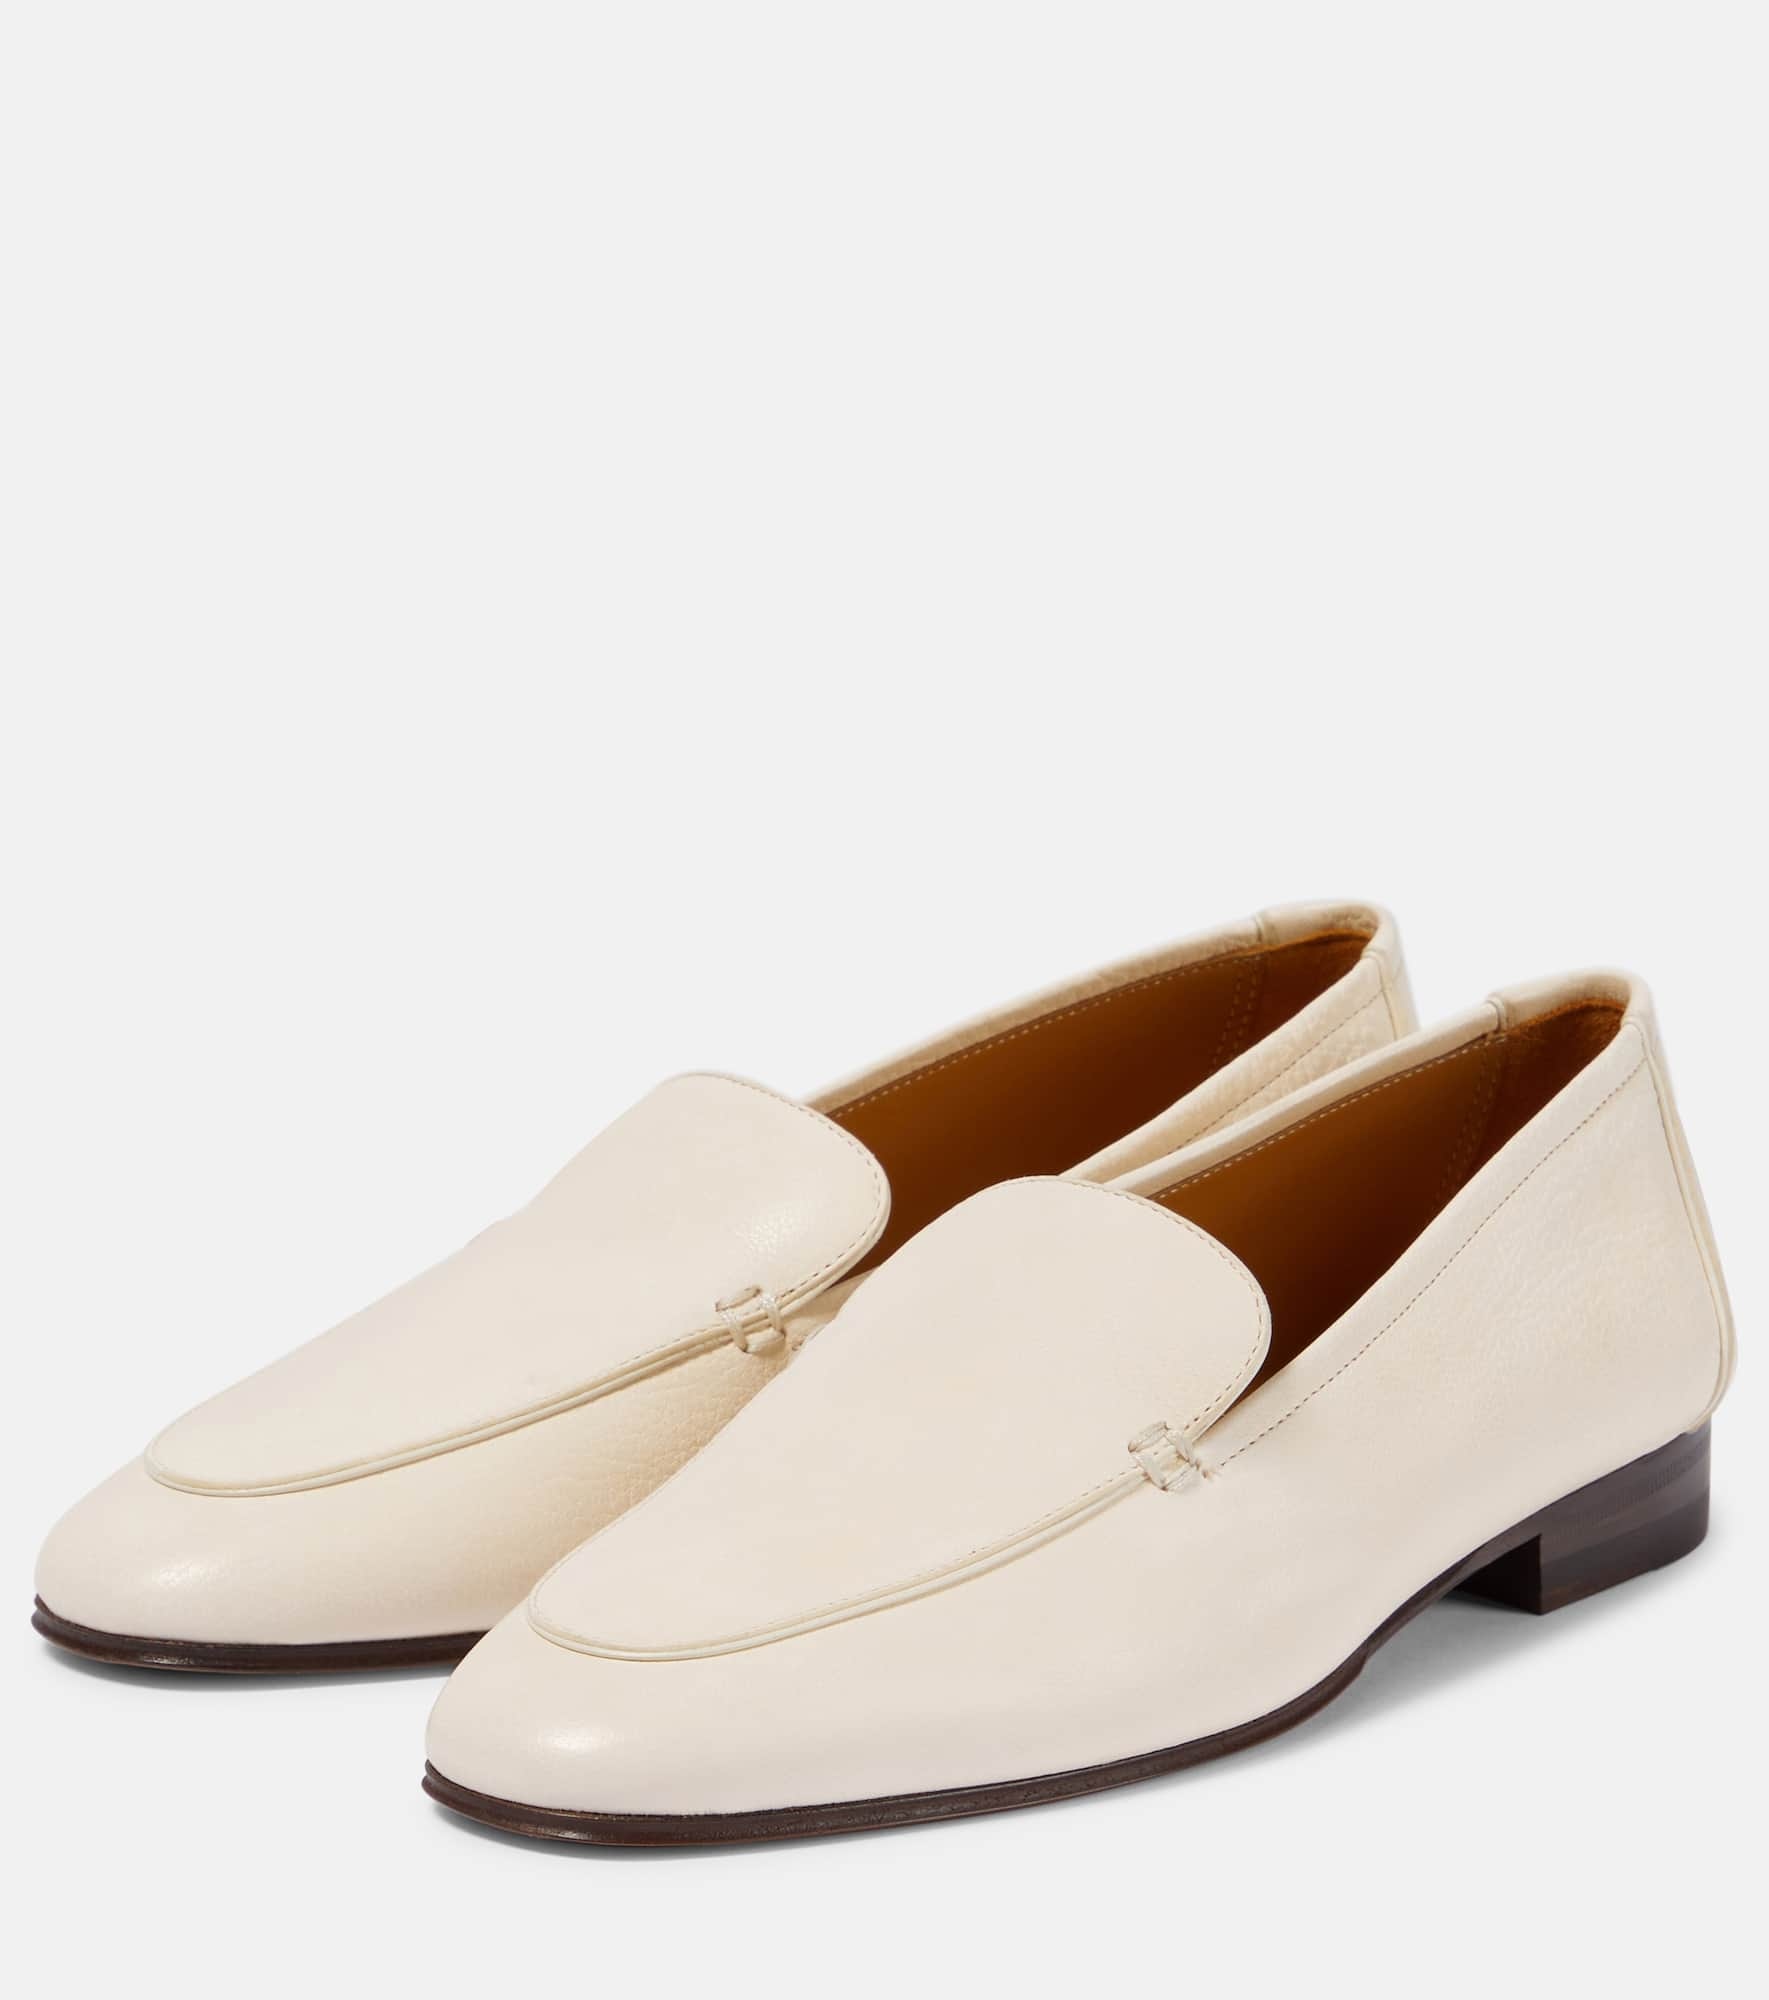 Adam leather loafers - 5